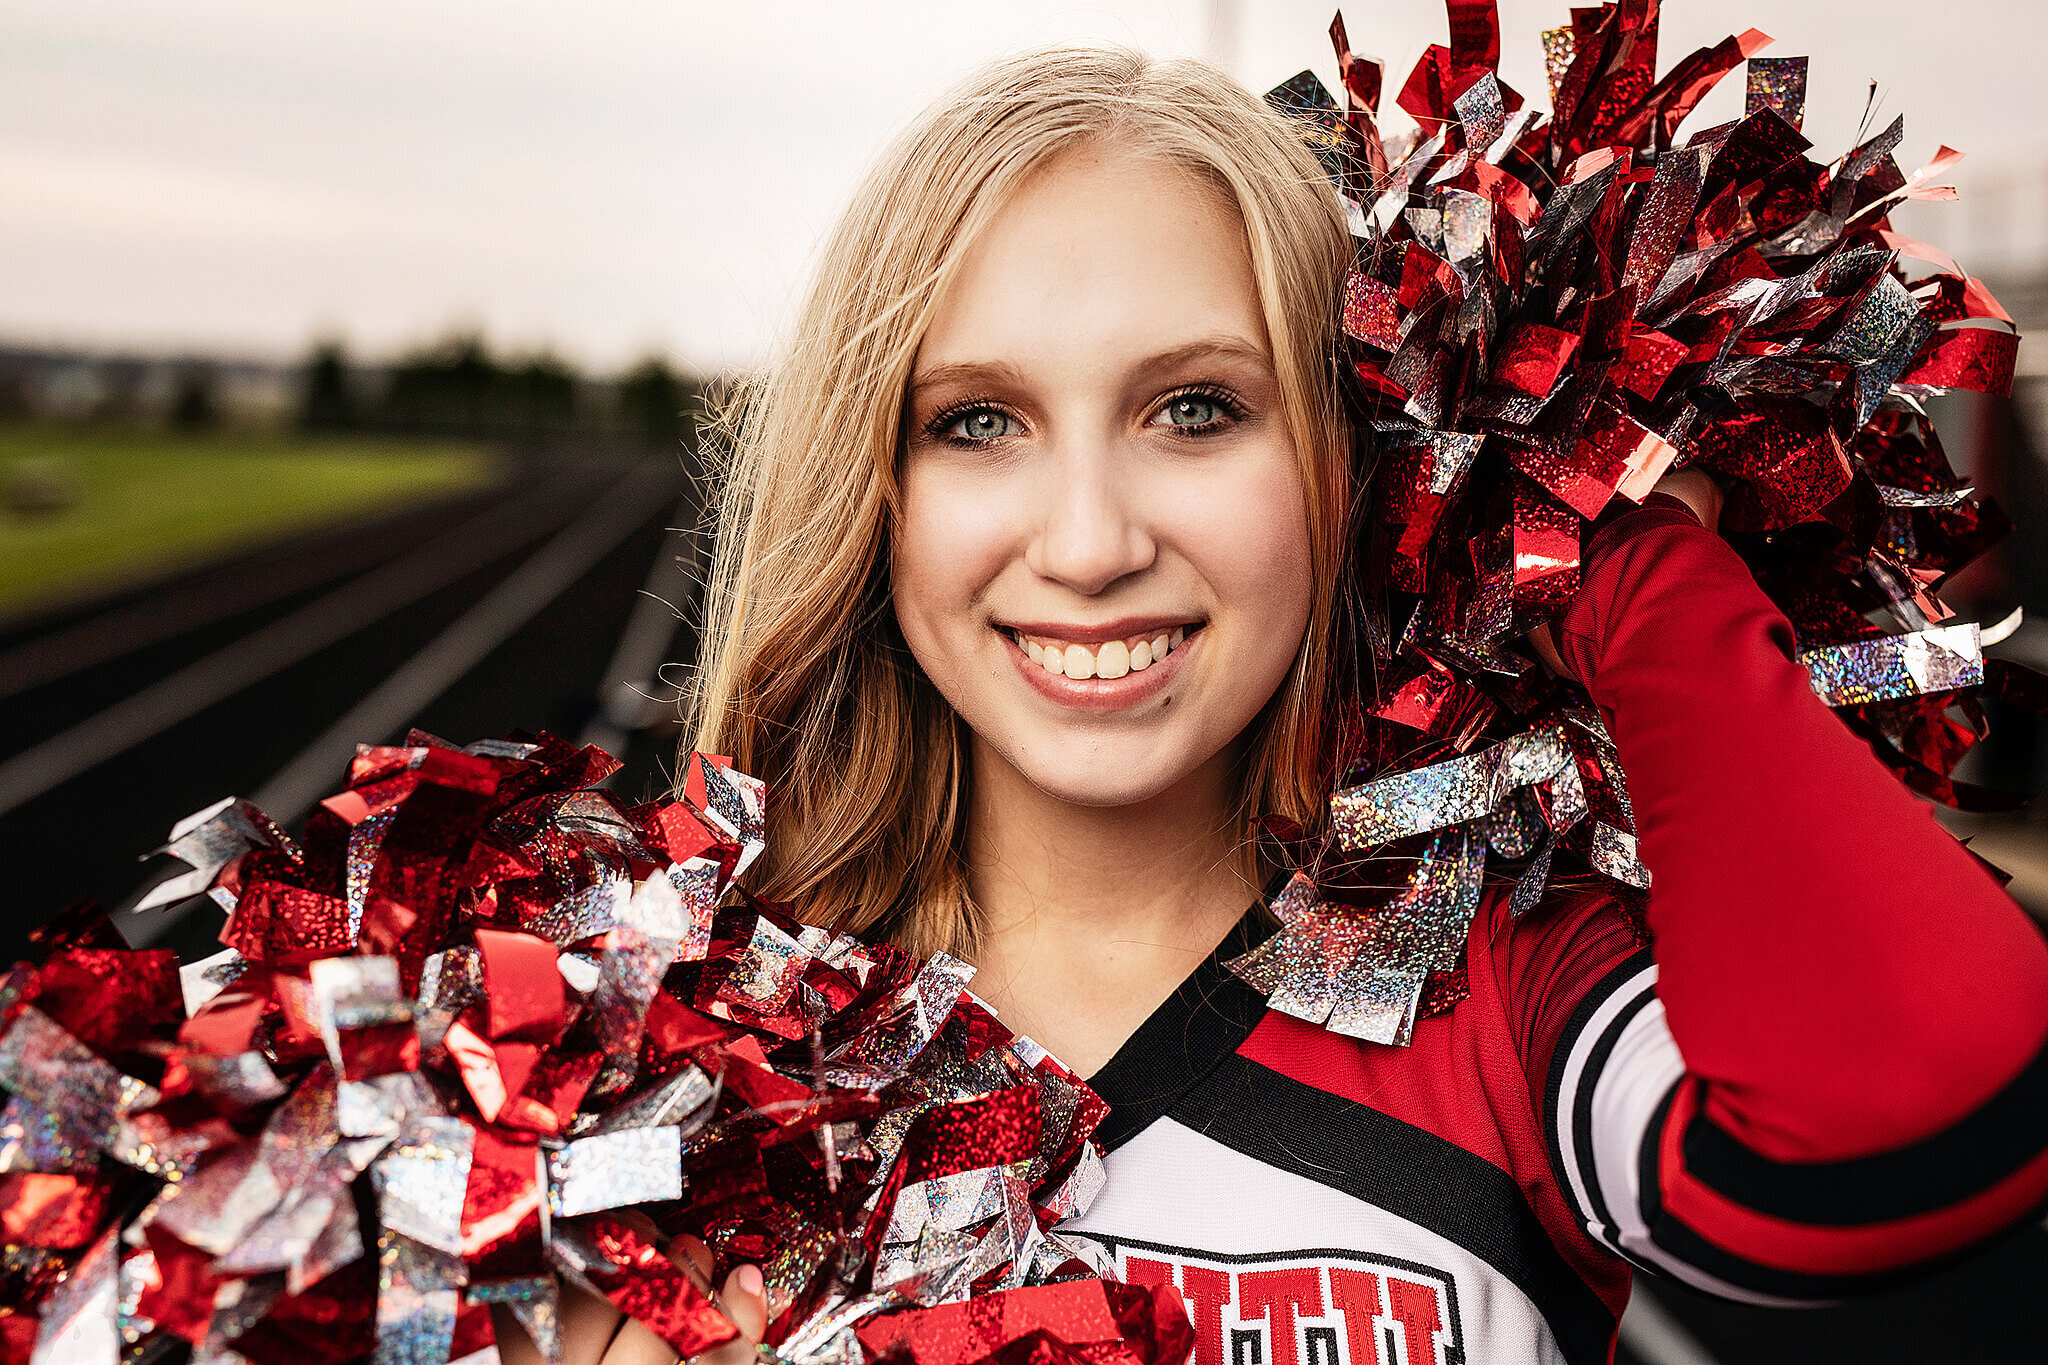 high school senior cheerleader holding red and silver pompoms  on track